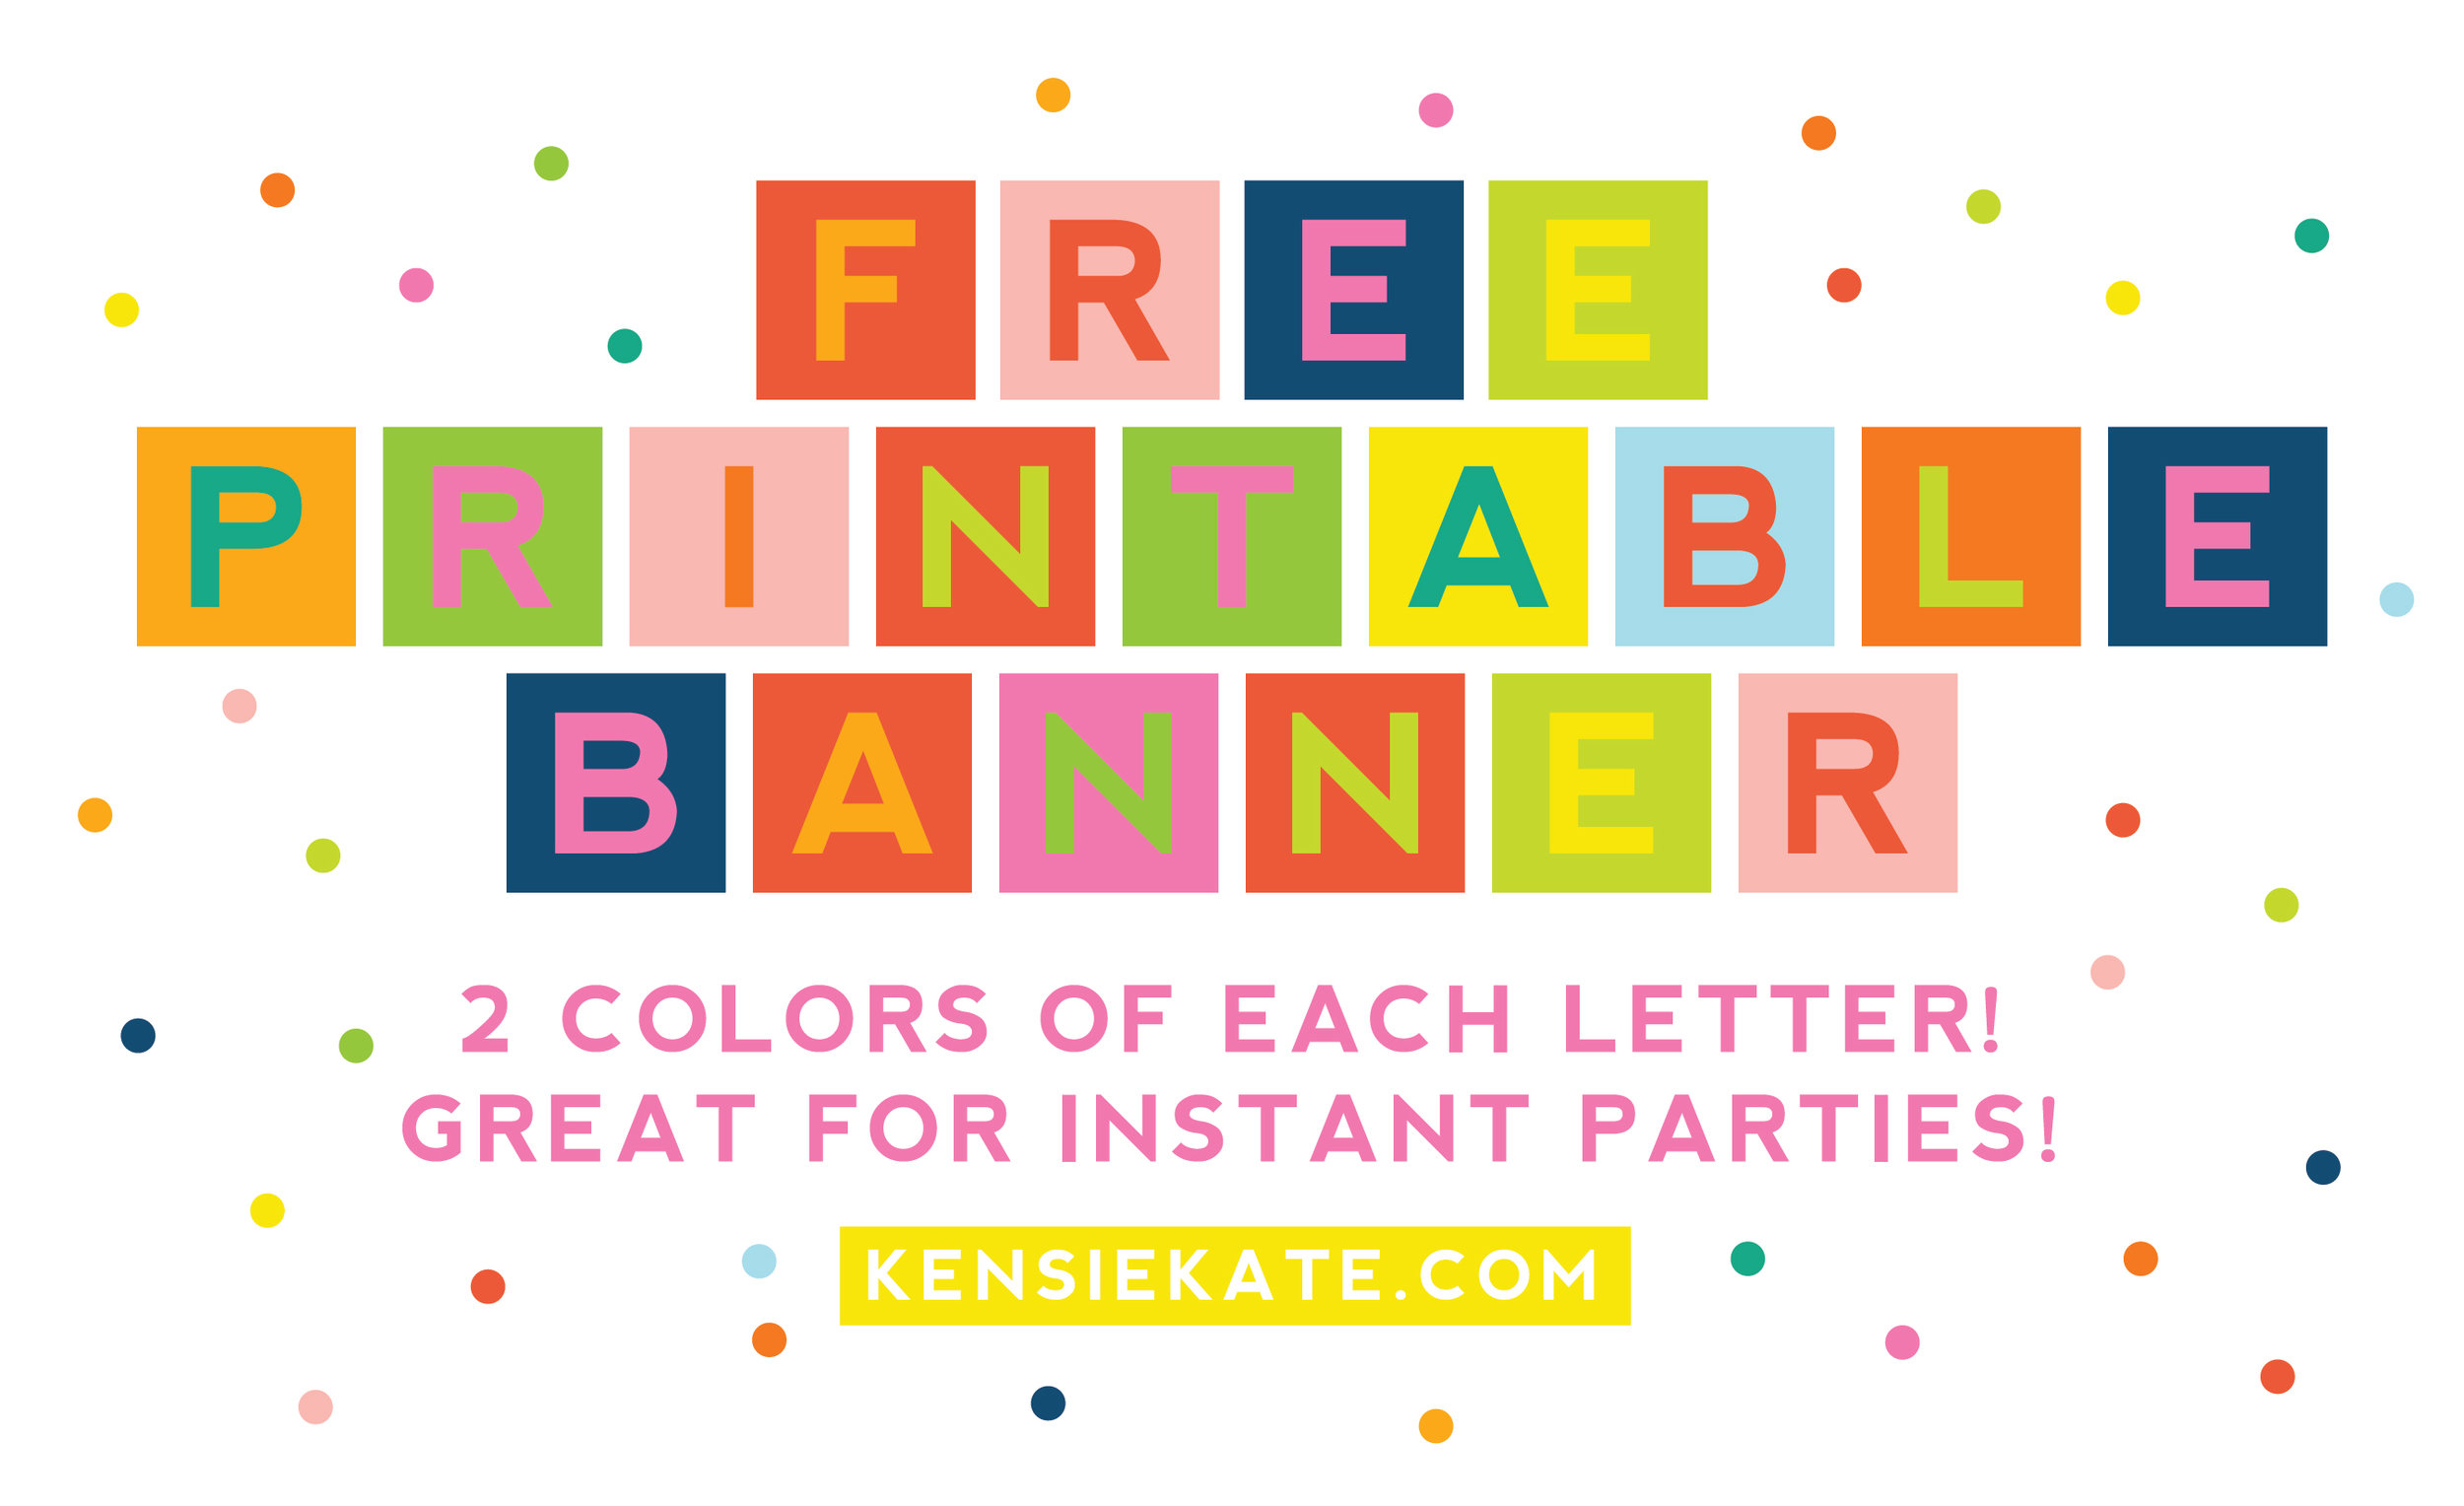 free printable banner! includes 2 of each letter